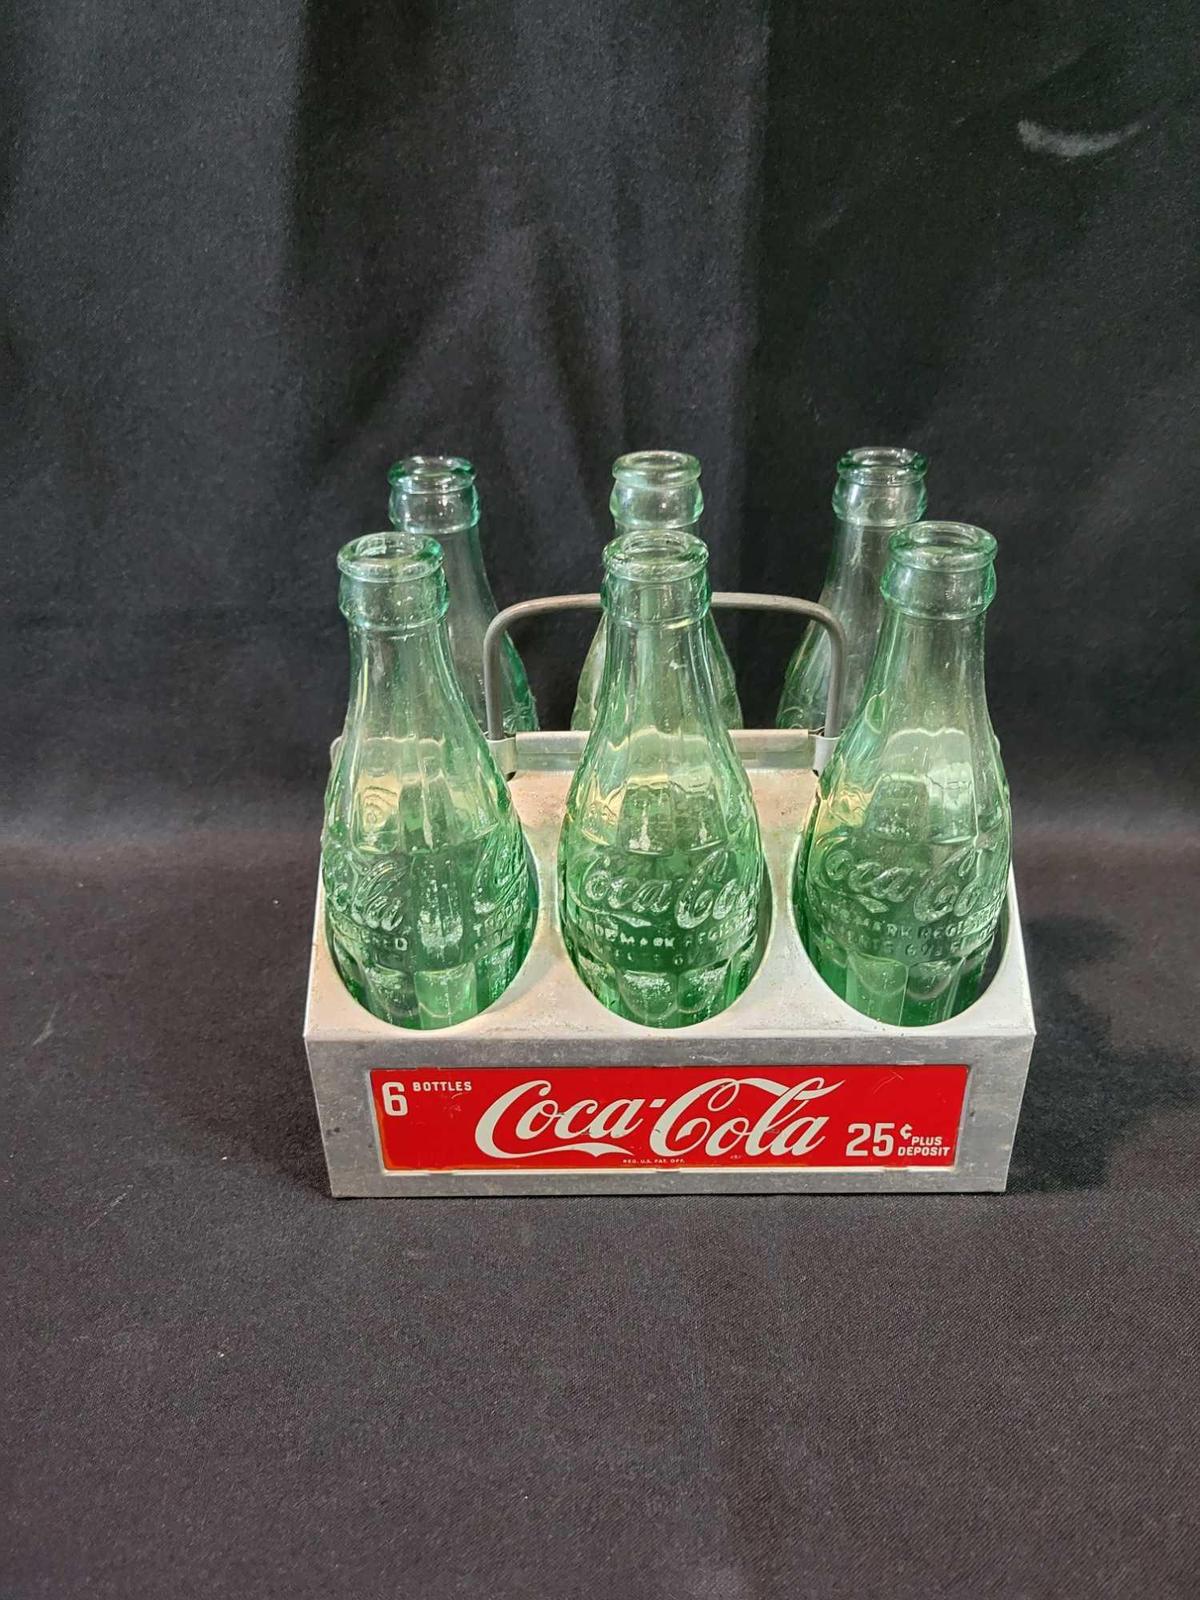 Coca Cola metal 6 pack bottle carrier with 6 bottles, 25 cent